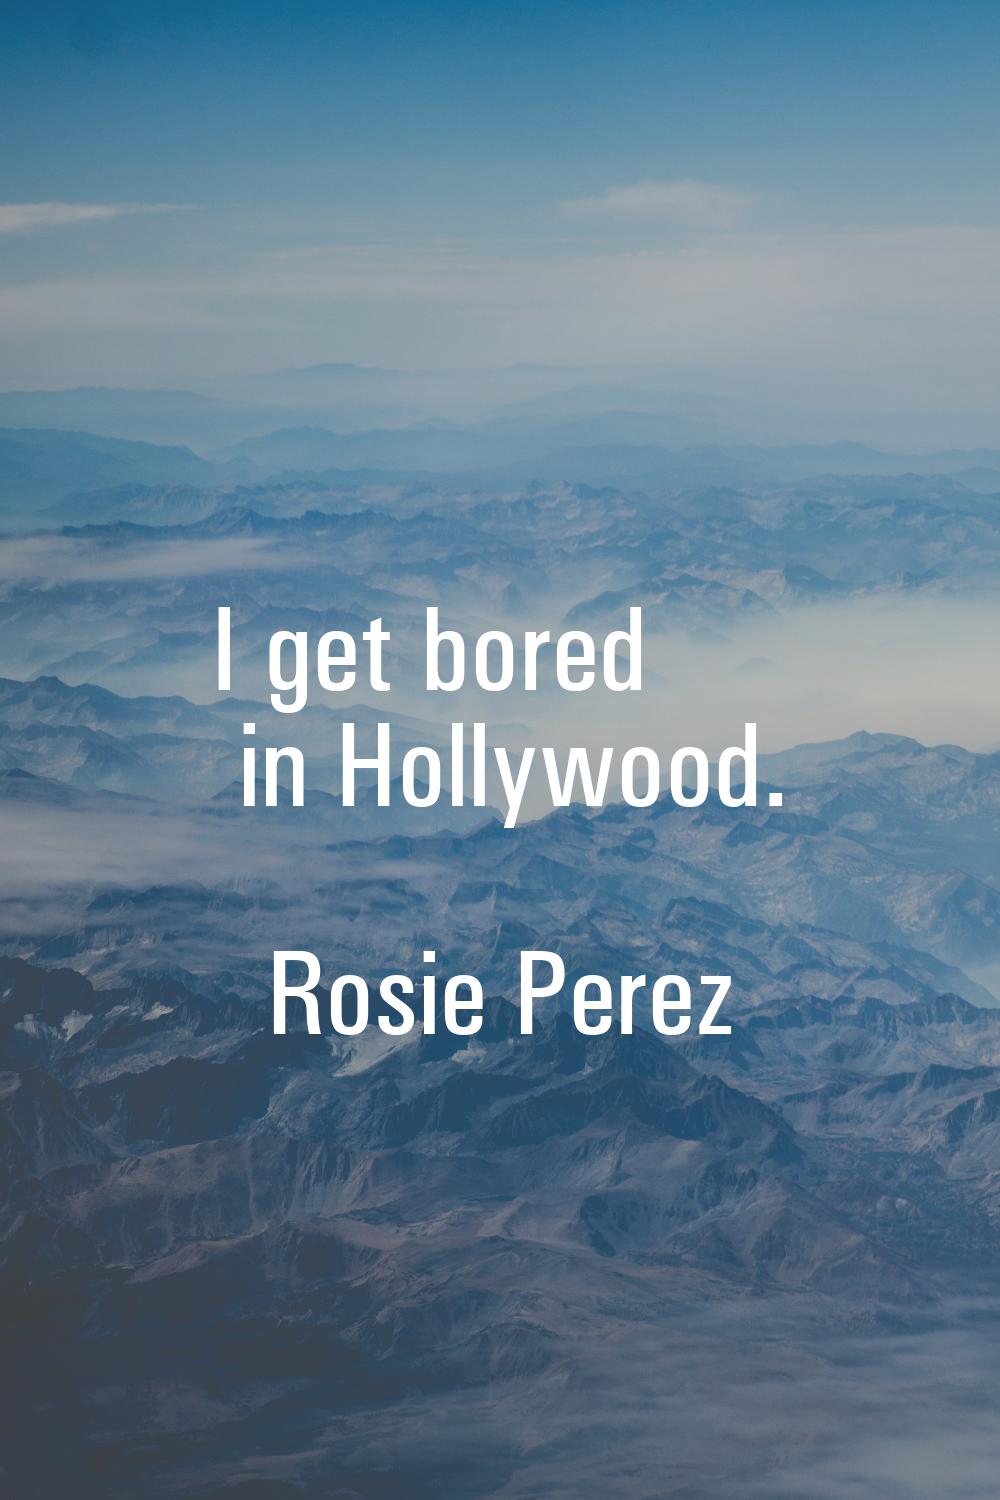 I get bored in Hollywood.